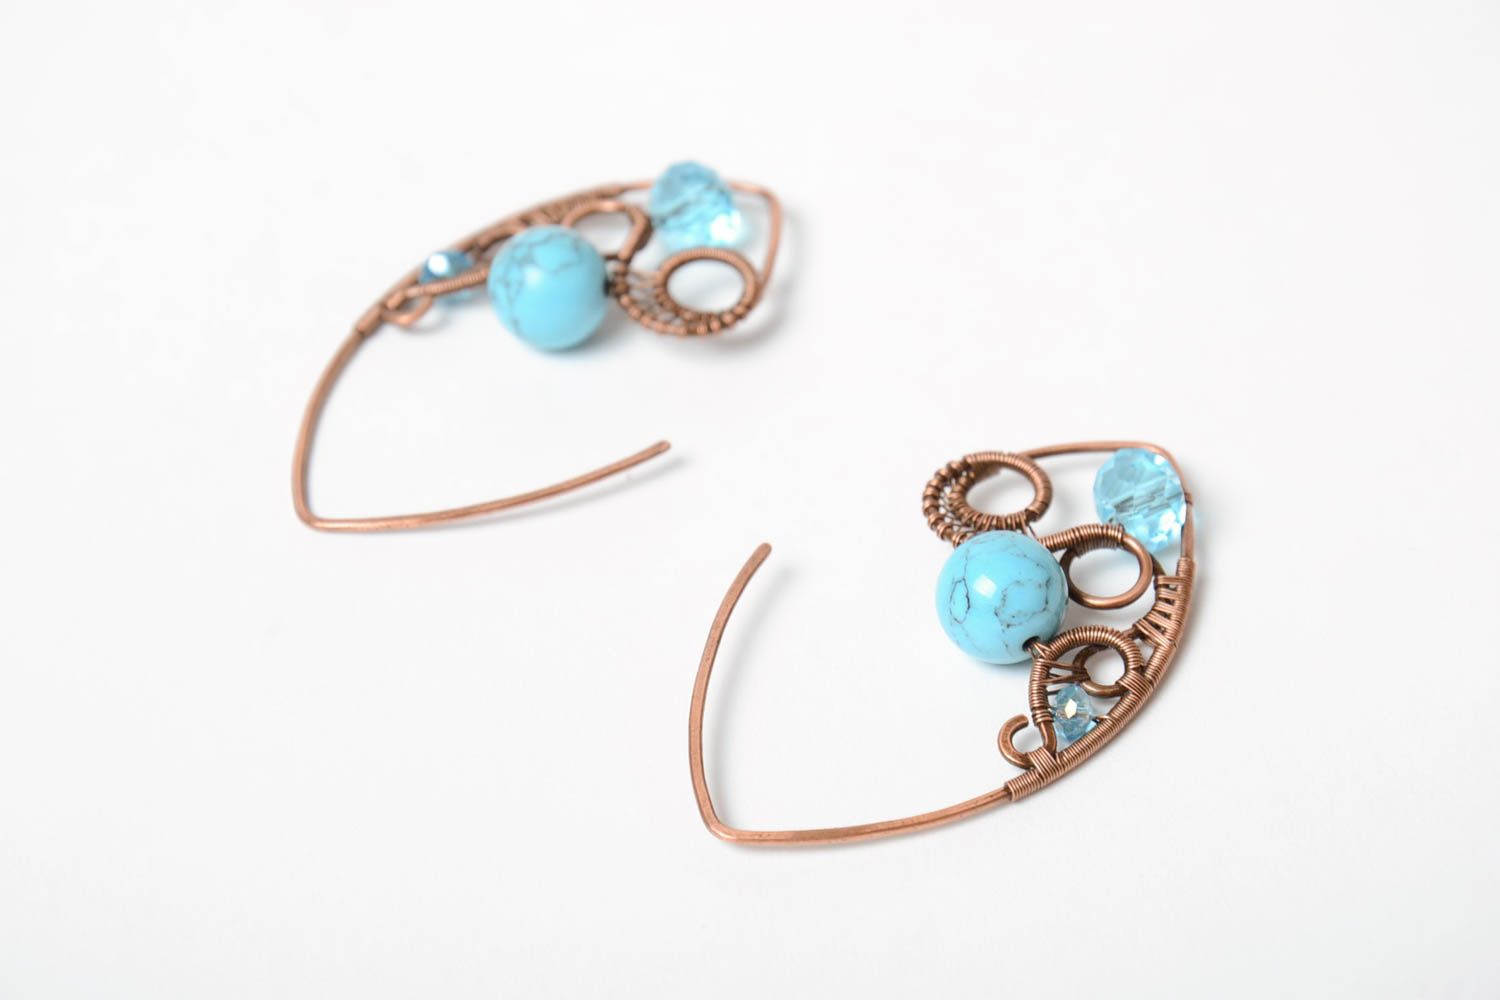 Handmade copper wire wrap earrings with natural turquoise and quartz beads photo 4